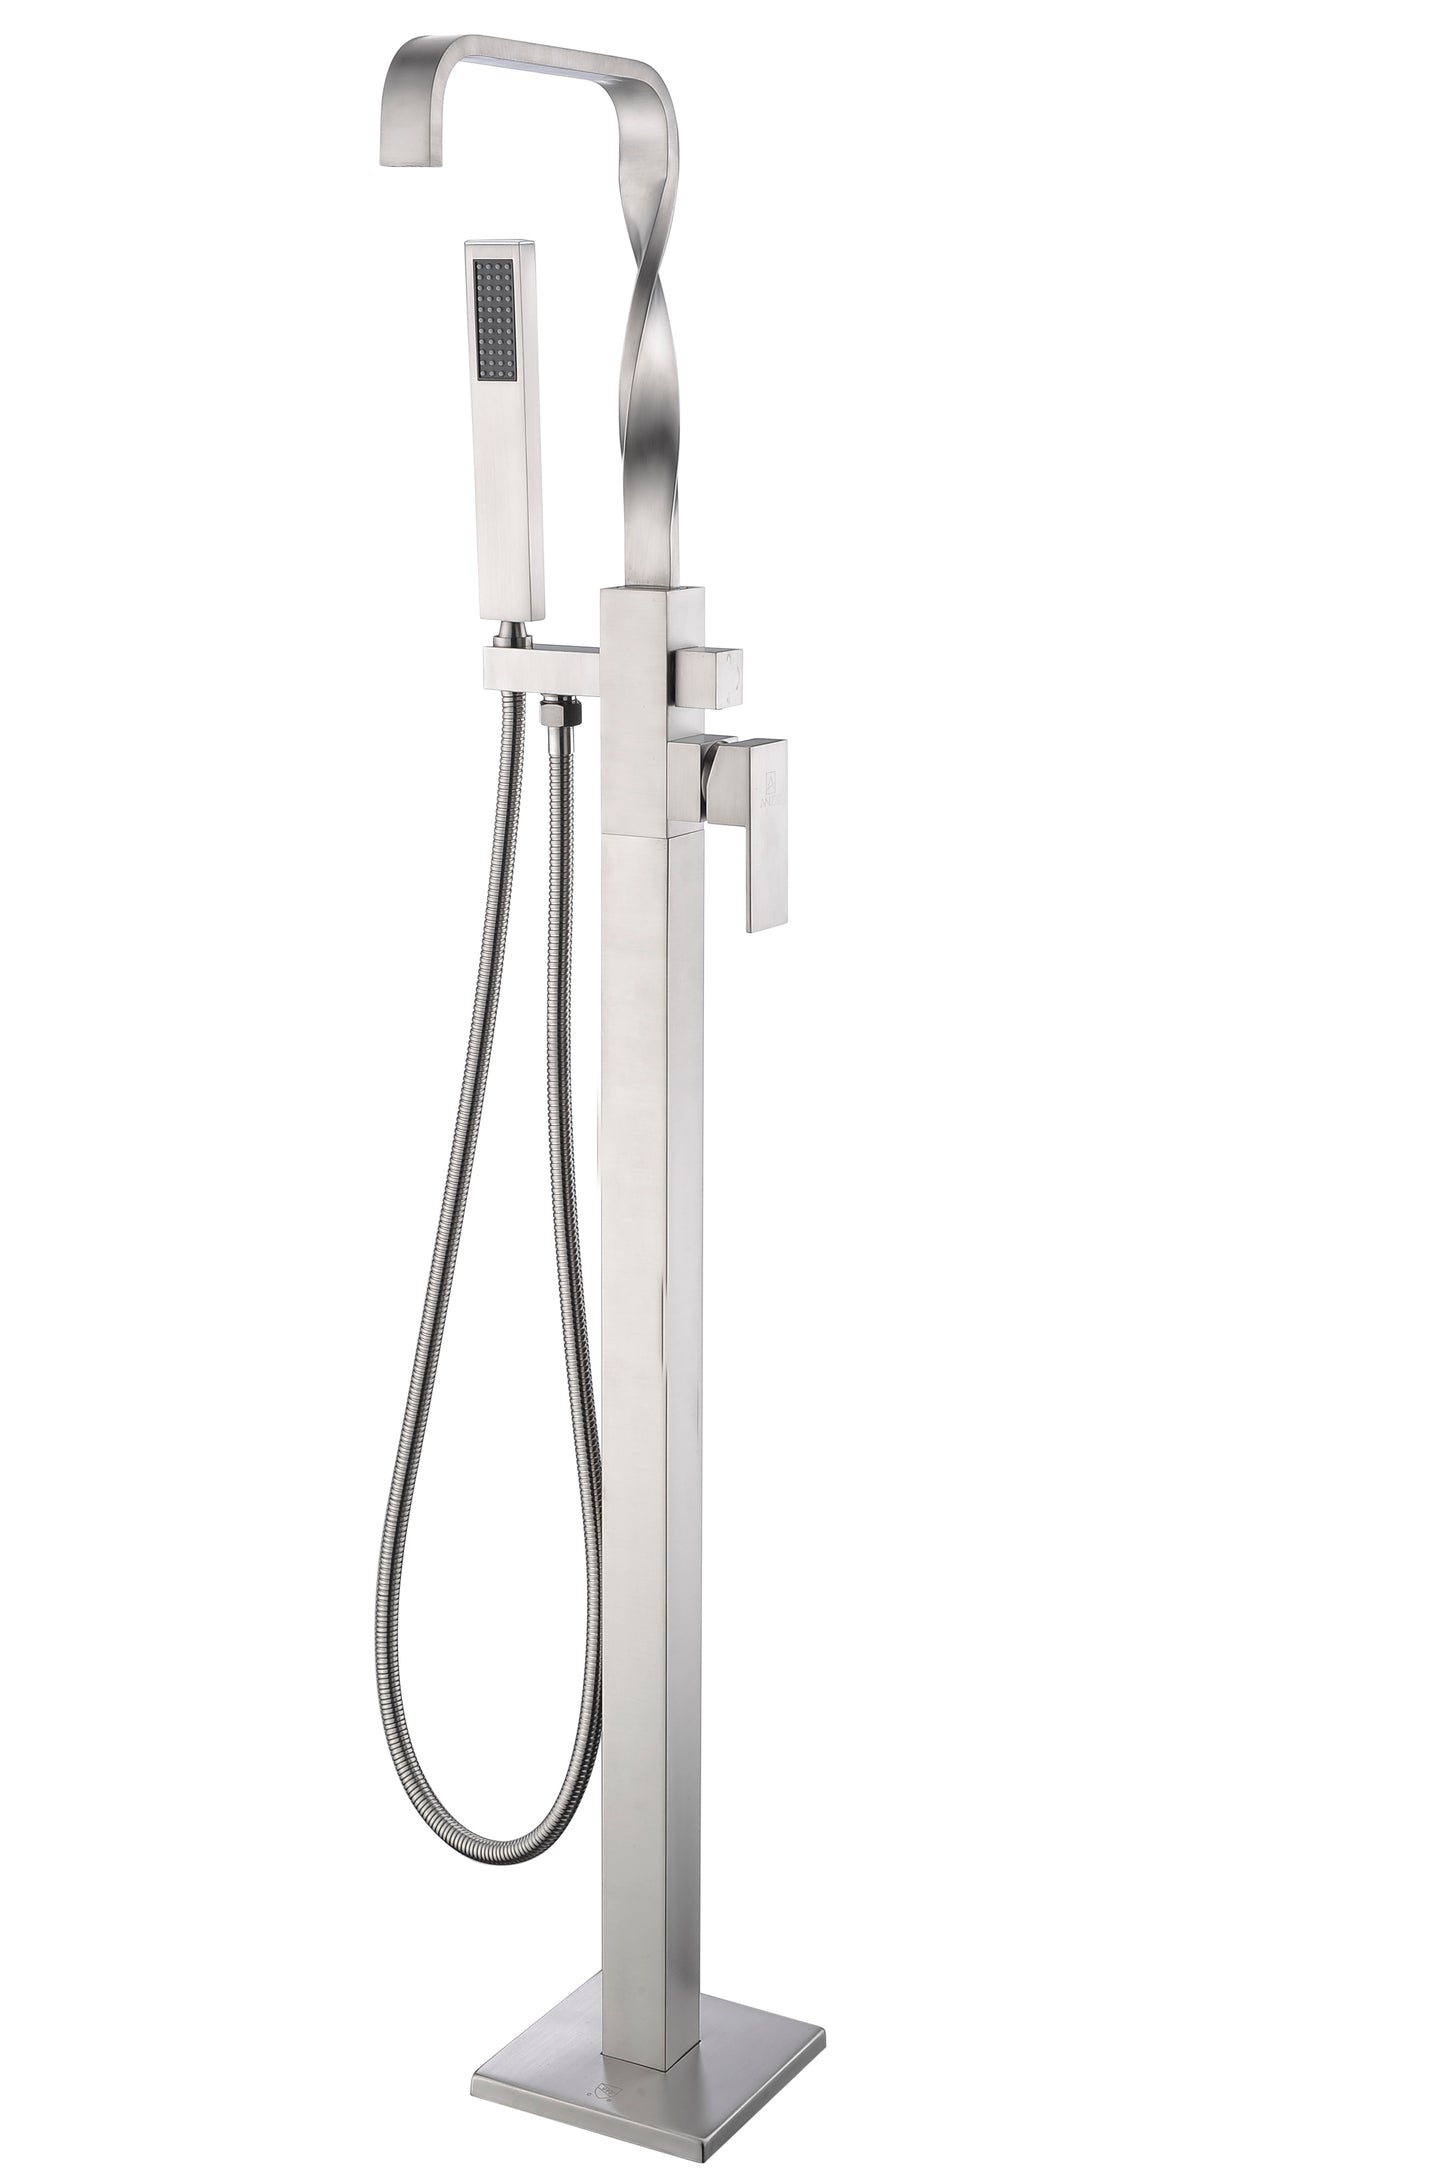 FS-AZ0050BN - Yosemite 2-Handle Claw Foot Tub Faucet with Hand Shower in Brushed Nickel